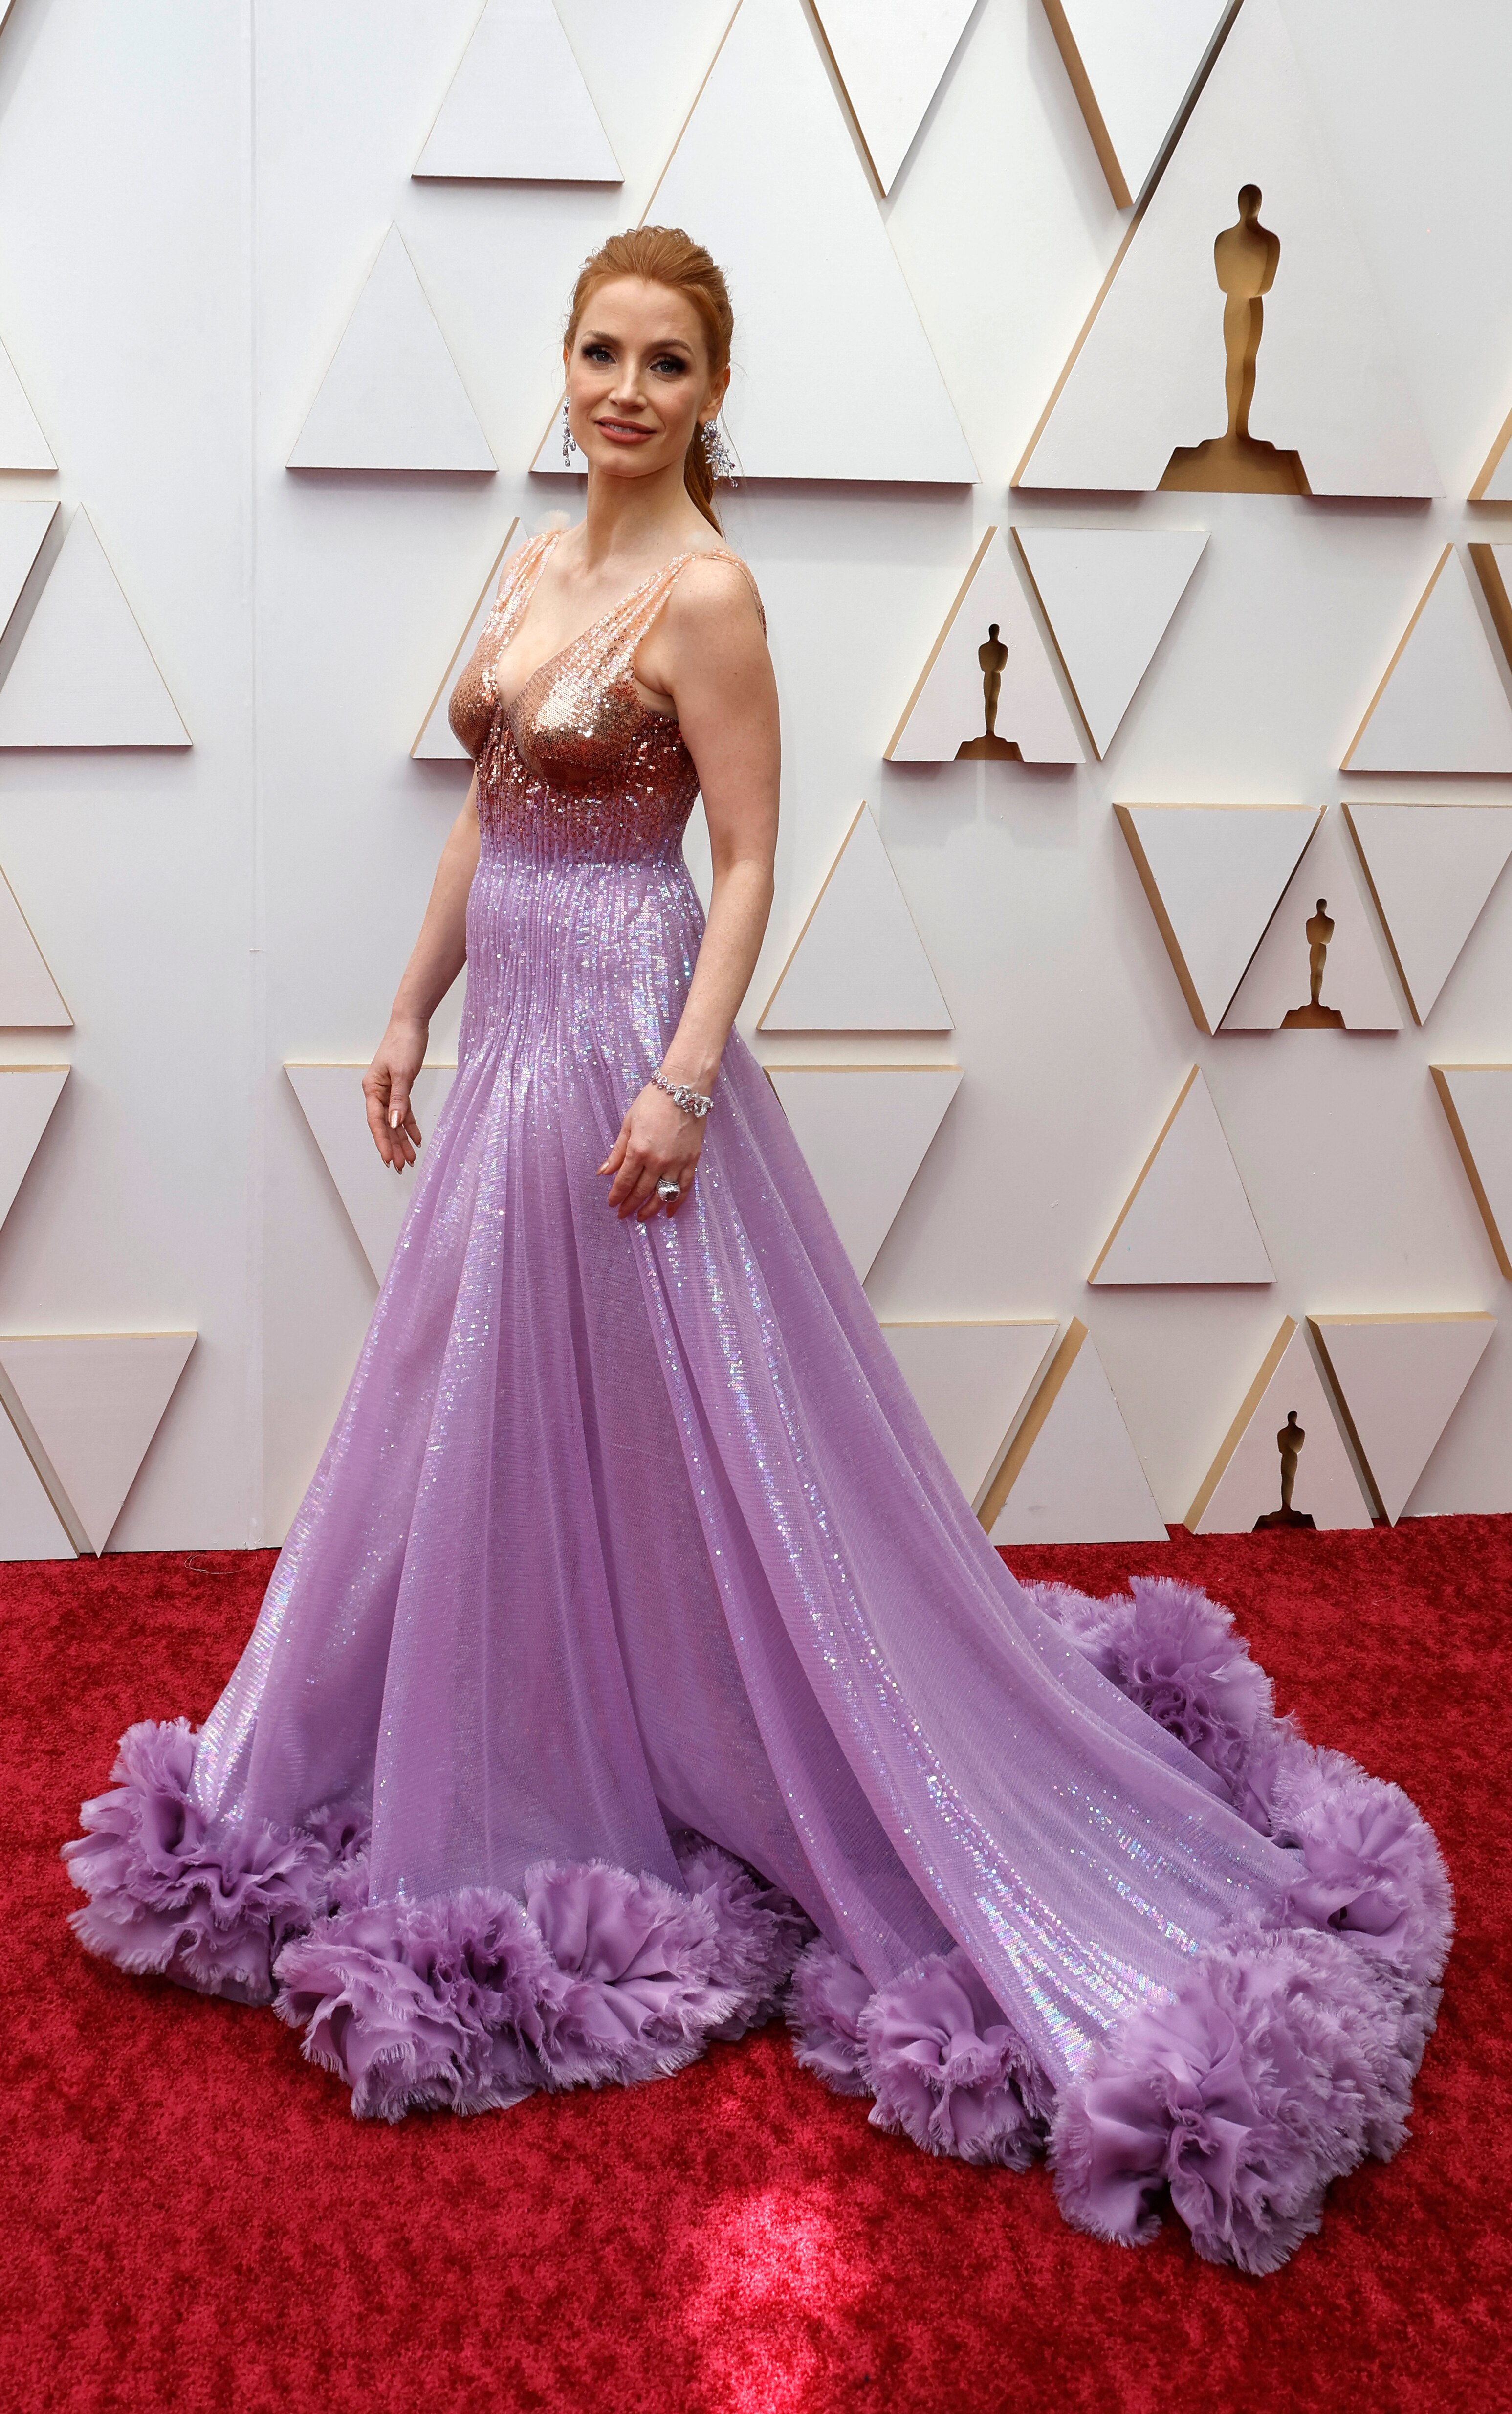 actor jessica chastain smiles on the oscars red carpet wearing a lilac ruffled gown with a sequined bodice 